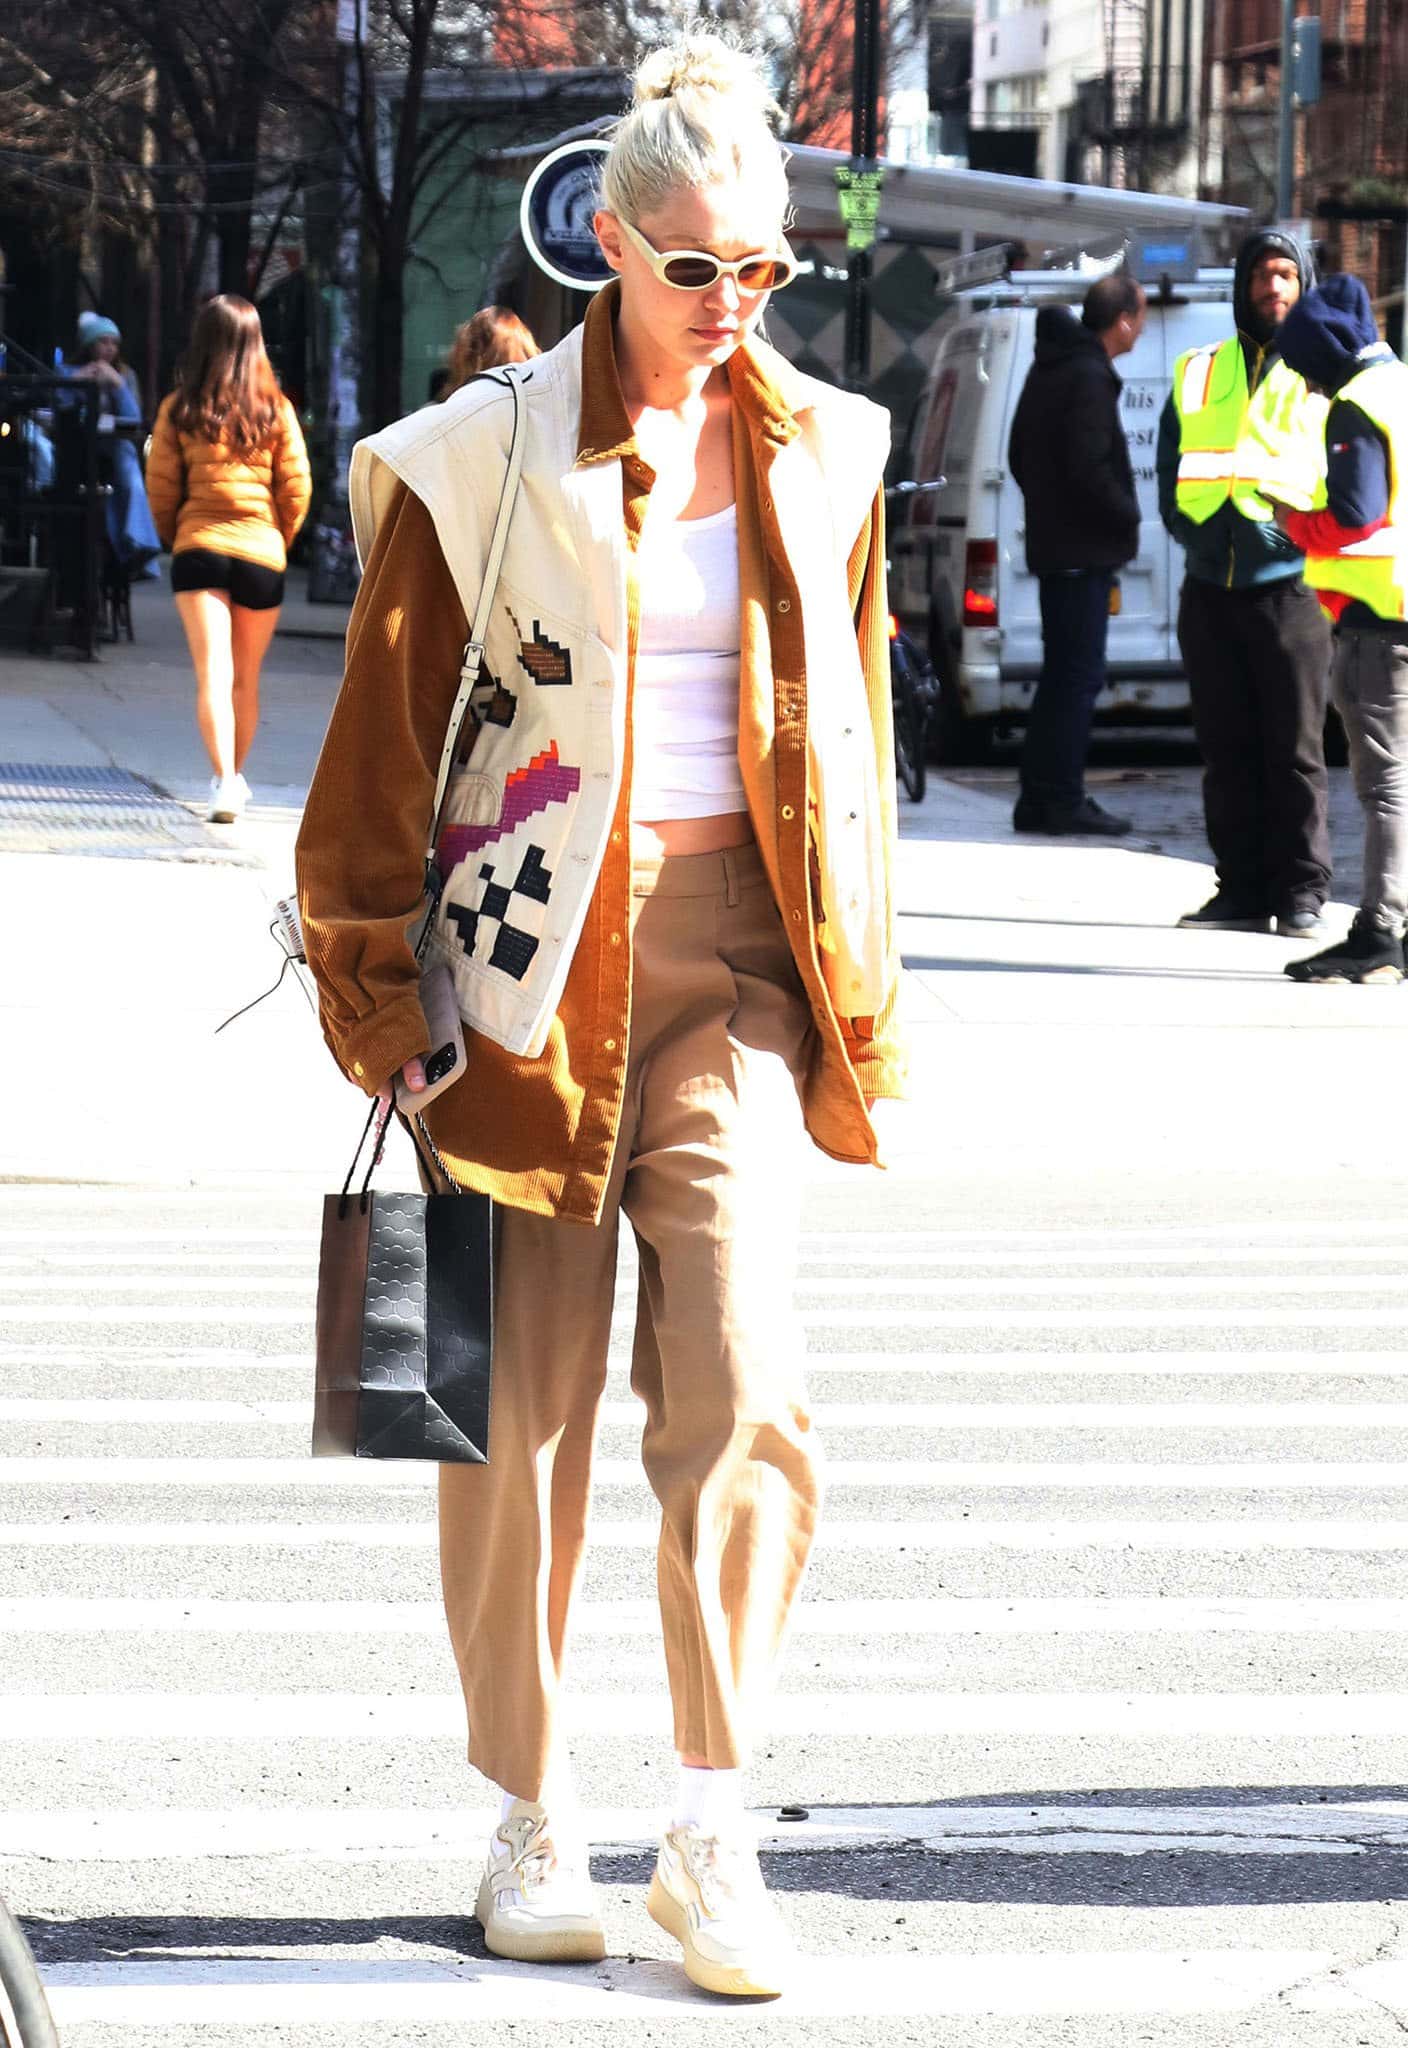 Gigi Hadid looks chic in a white tank top, khaki pants, tan shirt, and Isabel Marant embroidered vest